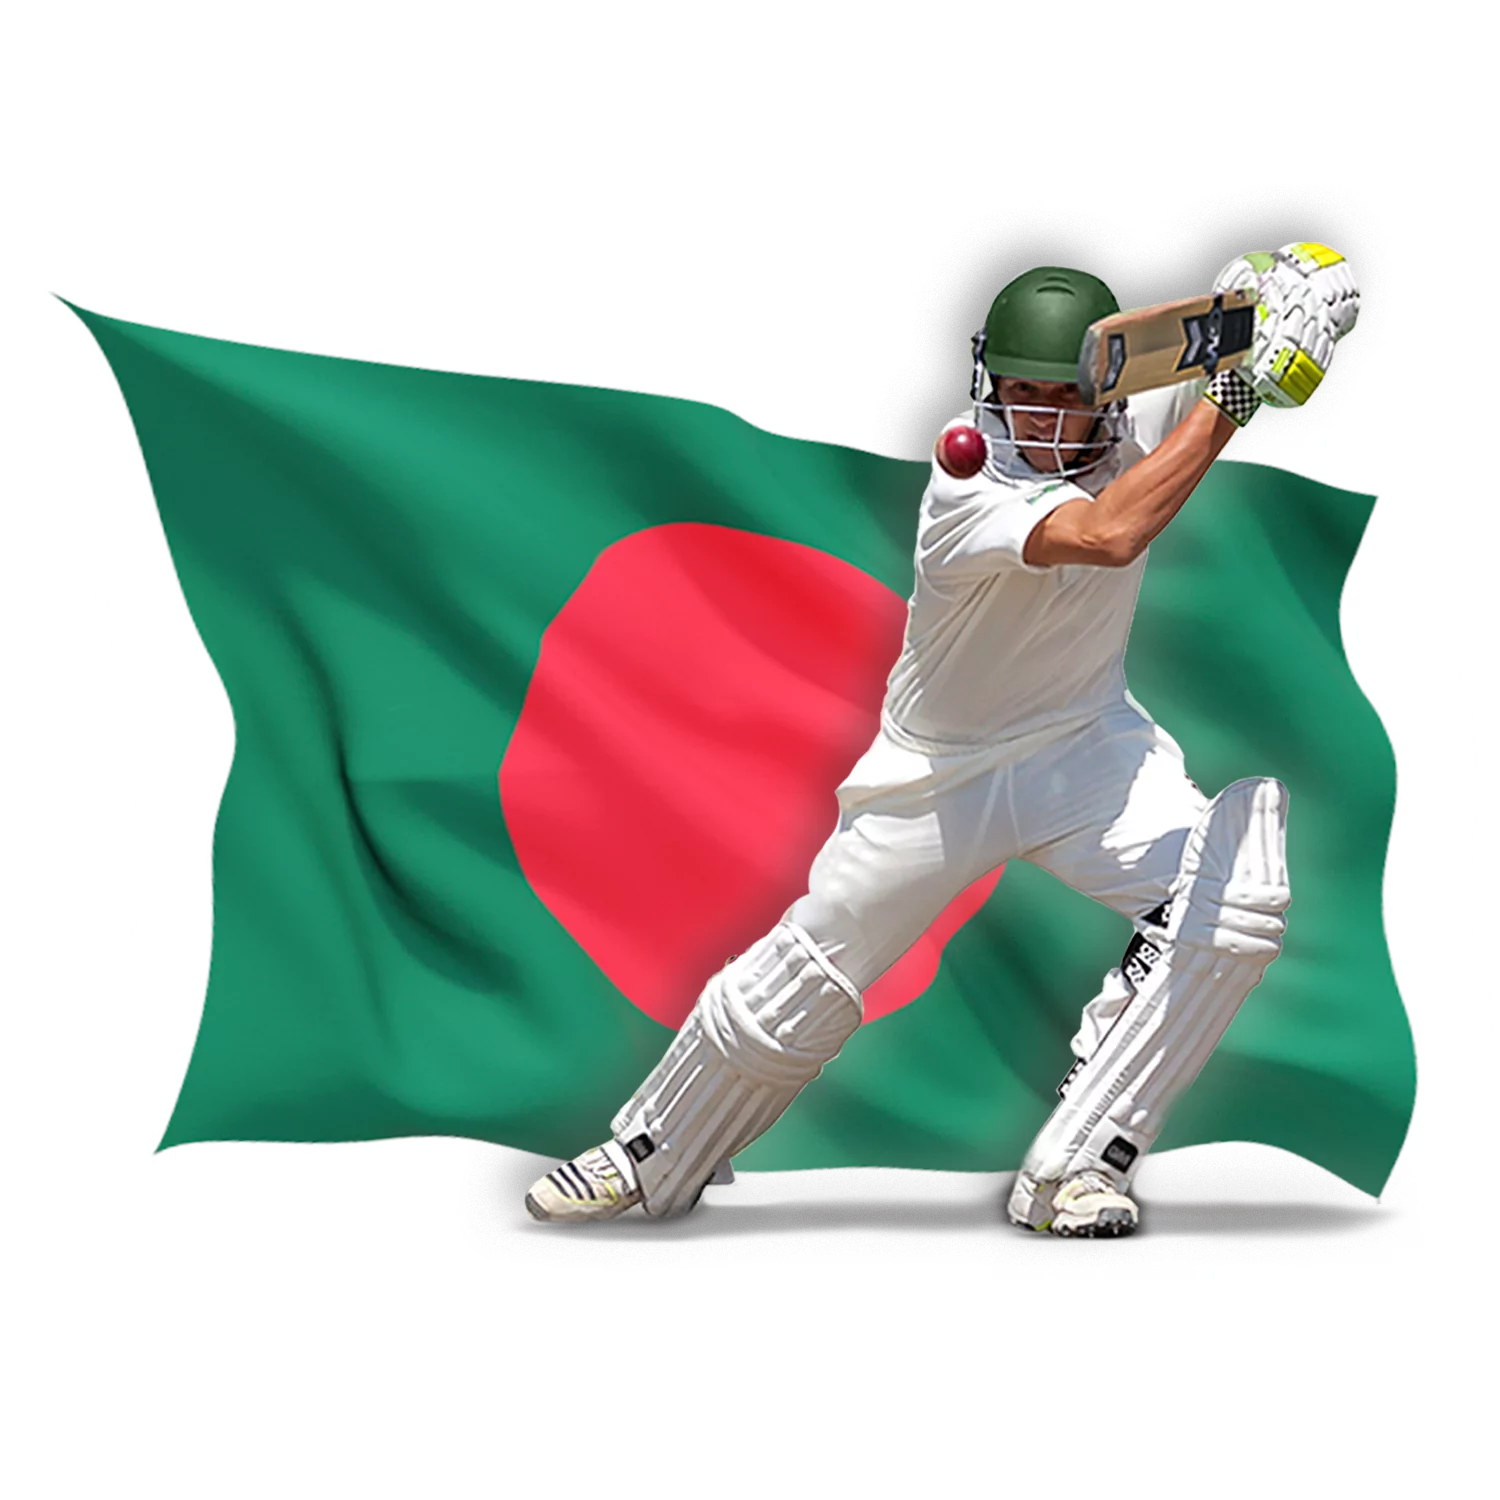 Learn how to bet on cricket from Bangladesh legally and safely.